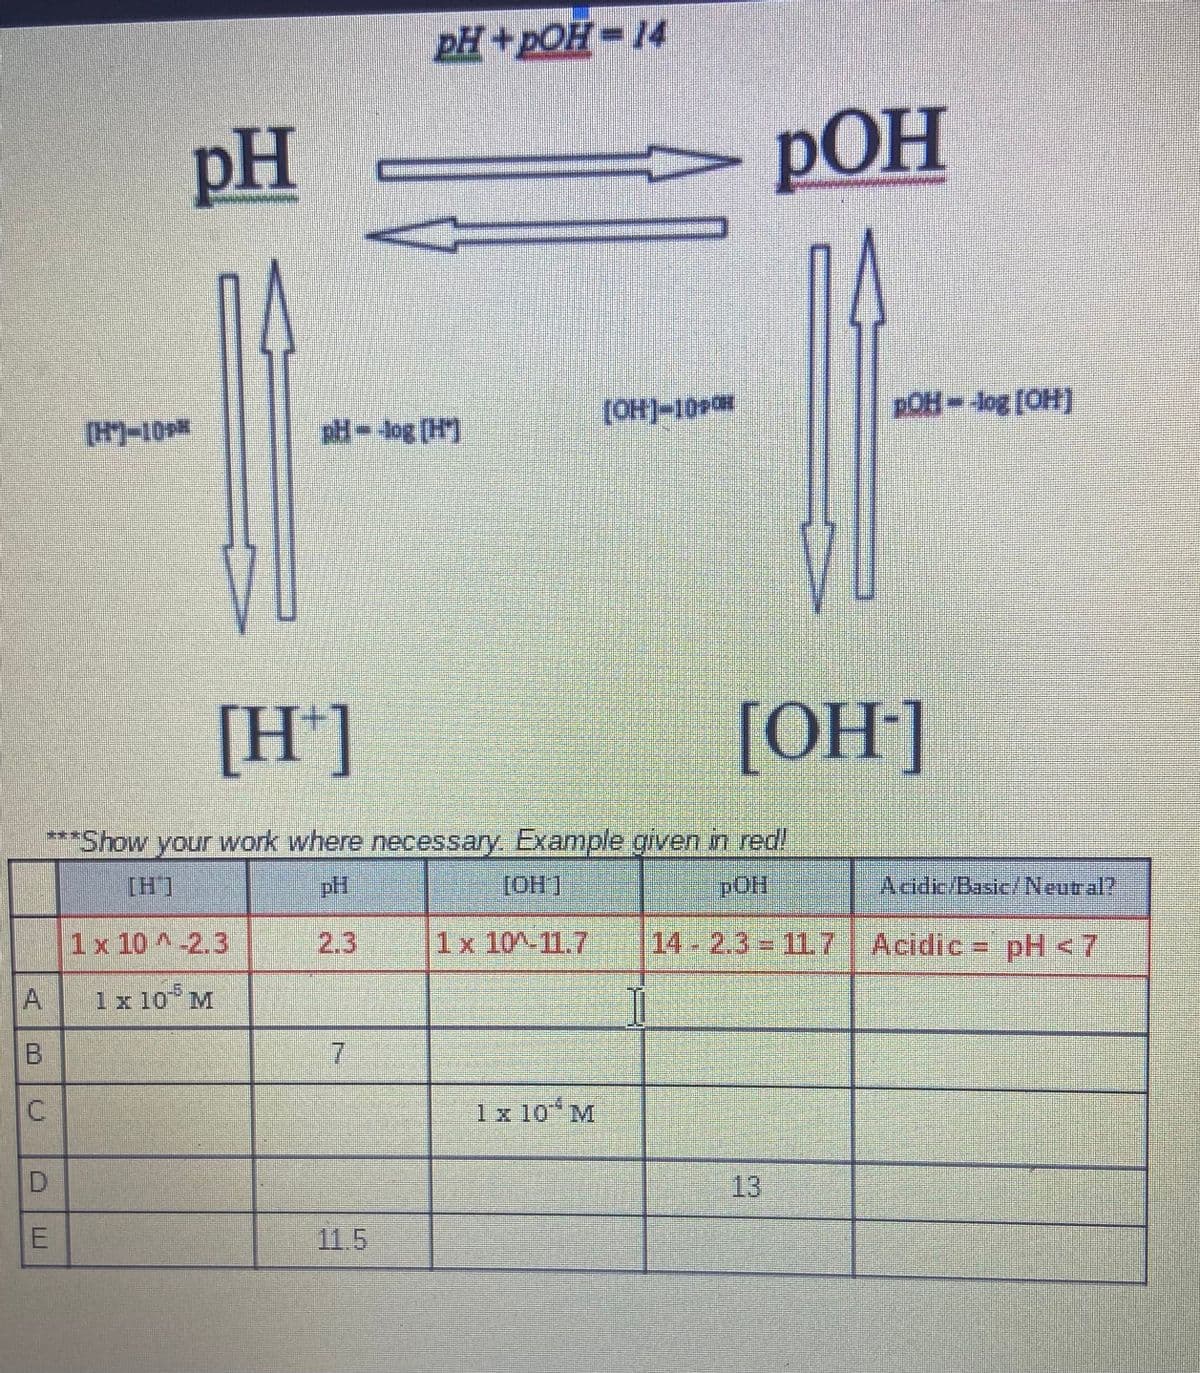 pH+pOH 14
pH
pOH
[OH]-10
POH-log [OH)
[H)-10
p-4og (H)
[H*]
[OH]
**Show your work where necessary Example given in red
***
pH
pOH
Acidic/Basic/Neutral?
1x 10 ^-2.3
2.3
1x10~11.7
14-2.3= 117
Acidic = pH <7
A
1 x 10 M
1x 10 M
13
11.5
B.
C.
